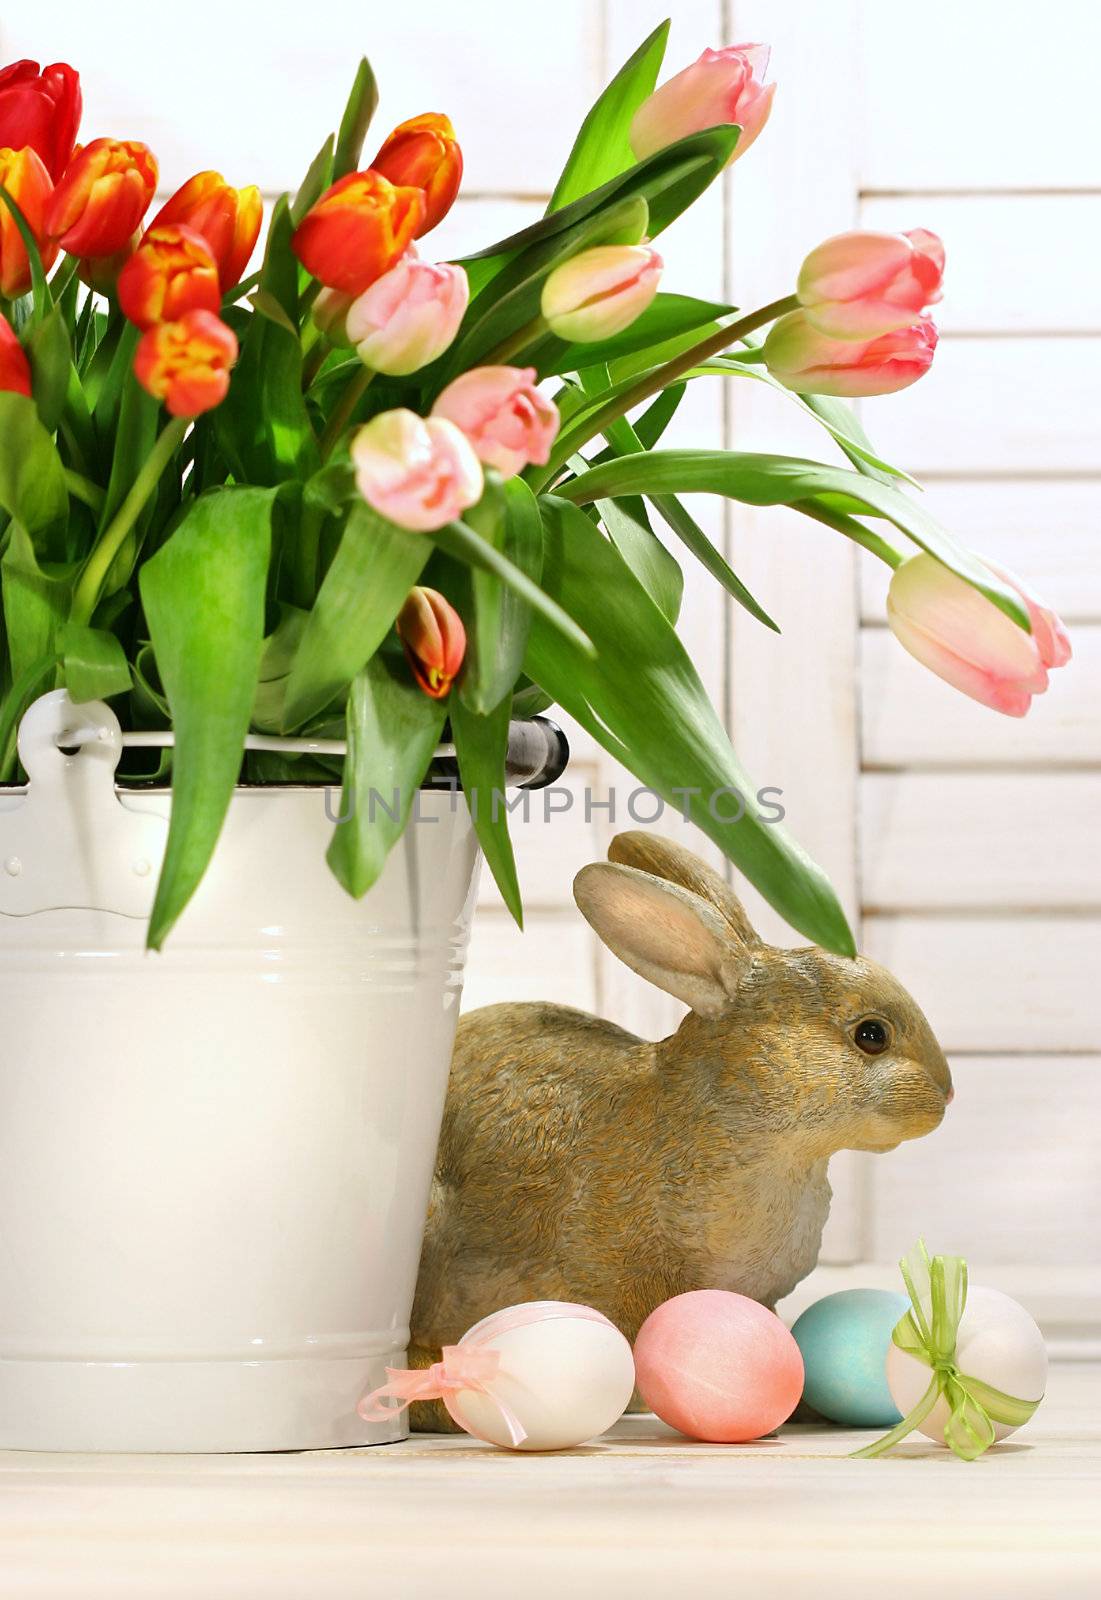 Pot of tulips with rabbit on the counter